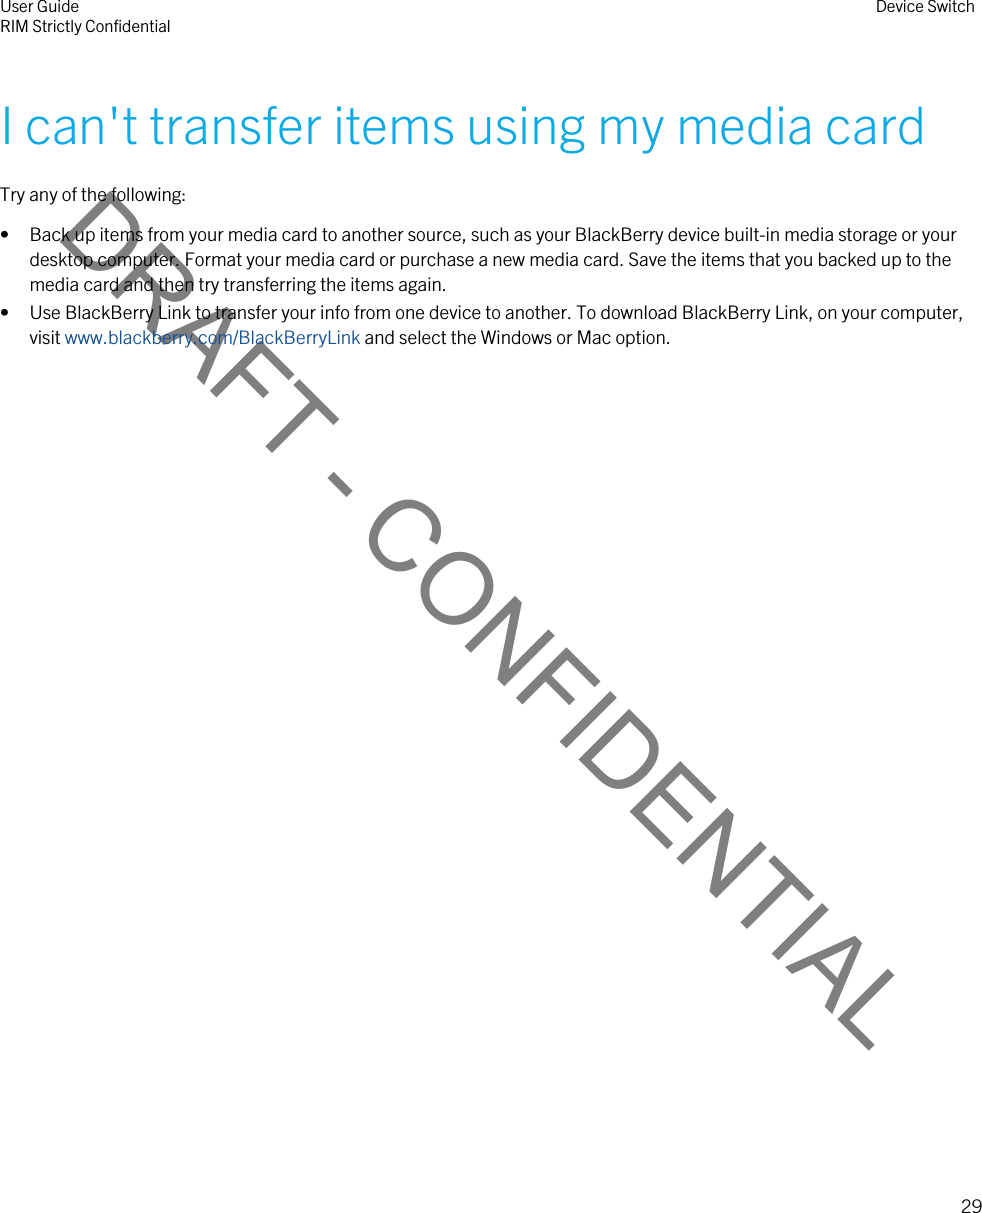 DRAFT - CONFIDENTIALI can&apos;t transfer items using my media cardTry any of the following:• Back up items from your media card to another source, such as your BlackBerry device built-in media storage or your desktop computer. Format your media card or purchase a new media card. Save the items that you backed up to the media card and then try transferring the items again.• Use BlackBerry Link to transfer your info from one device to another. To download BlackBerry Link, on your computer, visit www.blackberry.com/BlackBerryLink and select the Windows or Mac option.User GuideRIM Strictly Confidential Device Switch29 